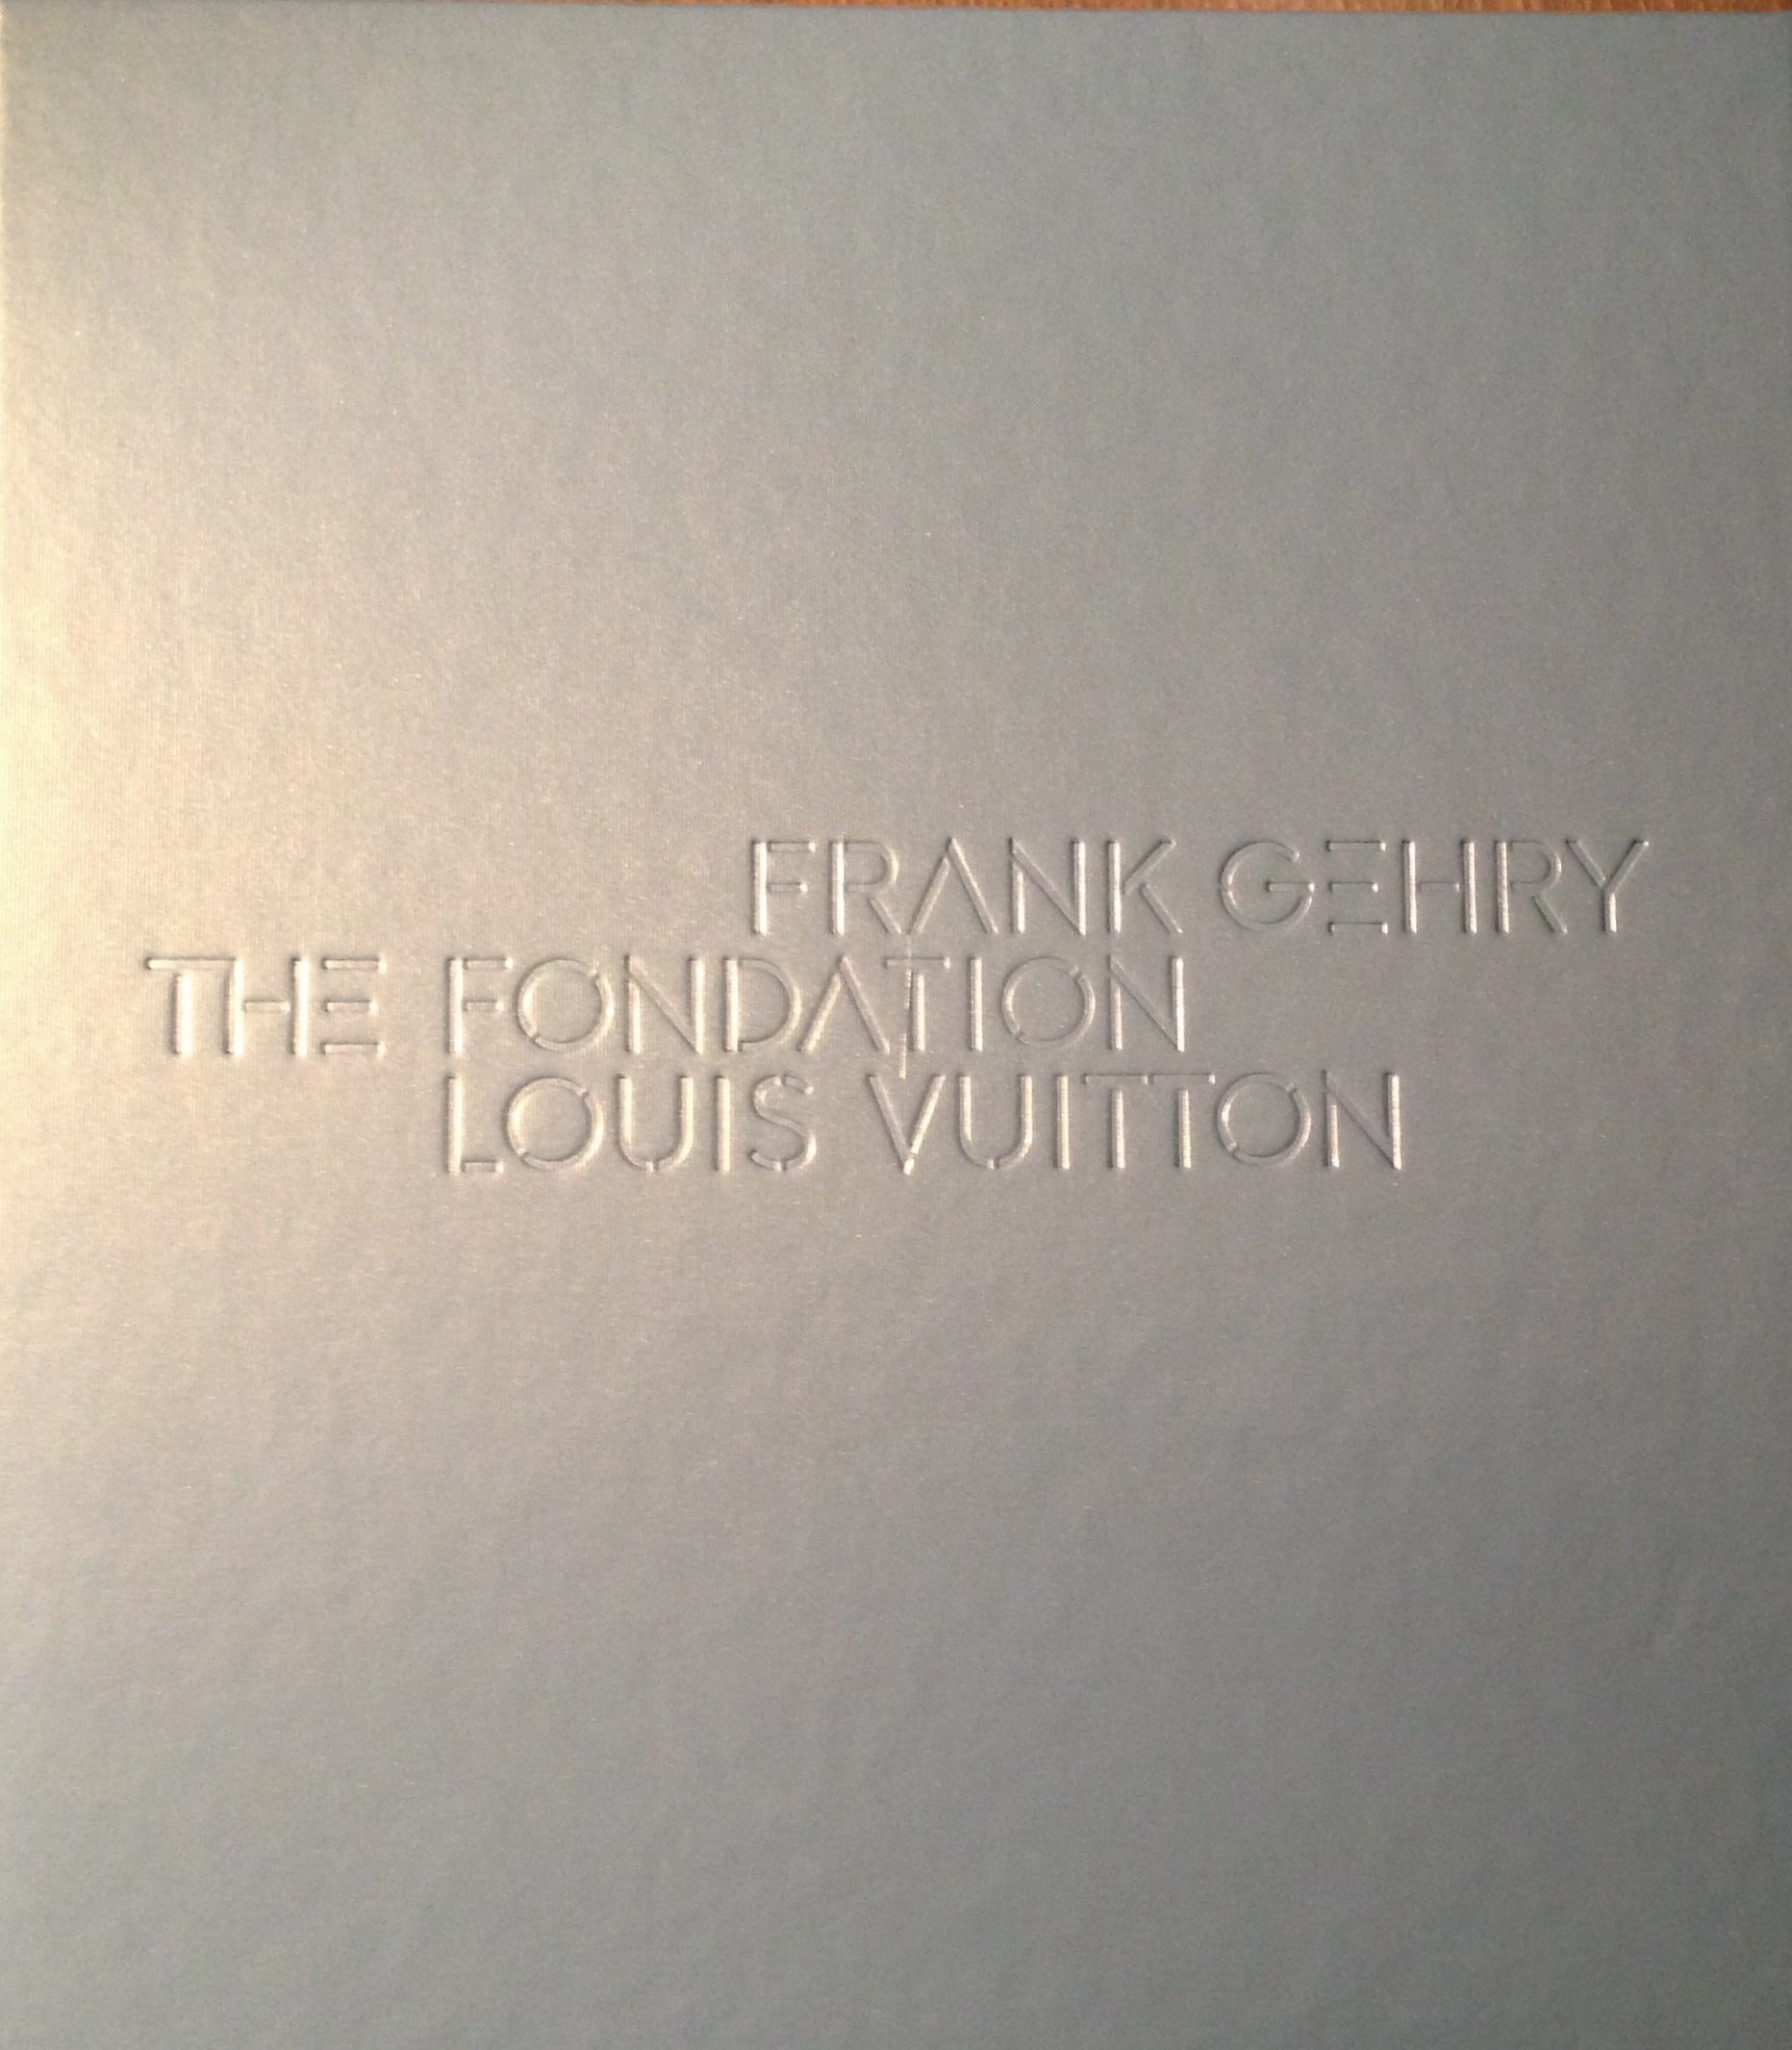 Book Frank Gehry, The Foundation Louis Vuitton, HYX